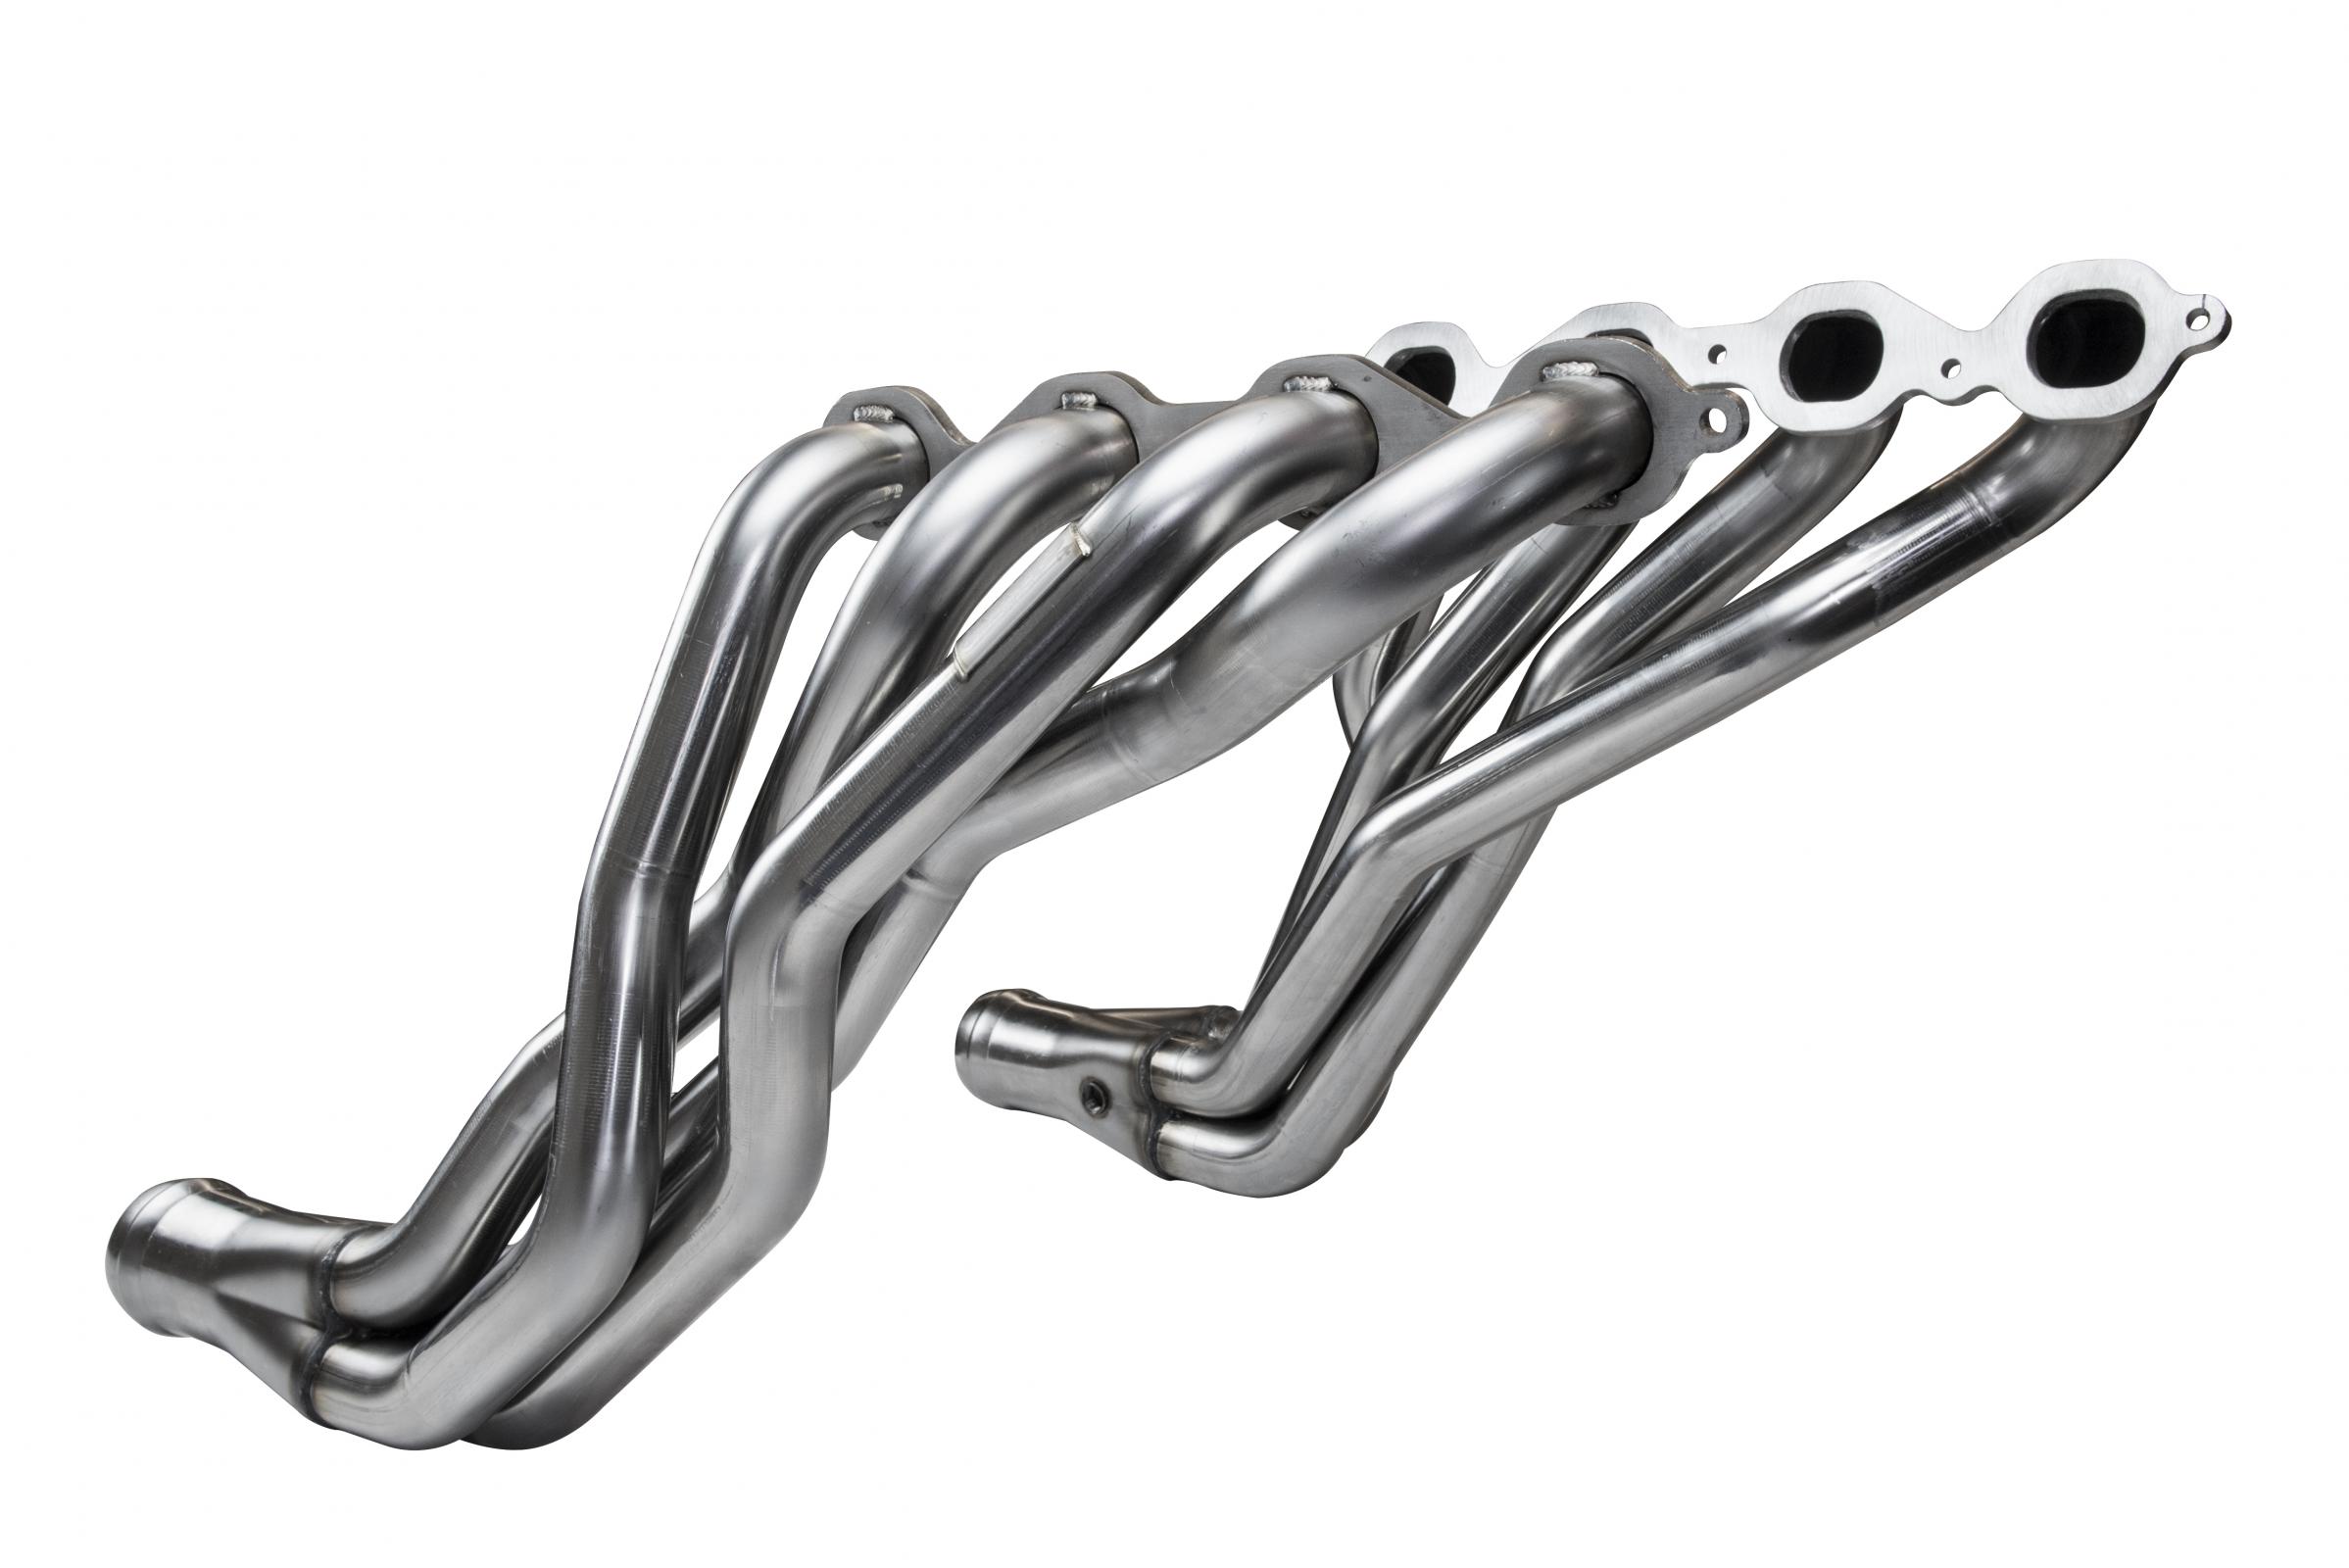 Stainless Steel Headers 2 x 3" Long Tube Incl. Cometic Multi-Layer Gaskets/Stage 8 Bolts/Torca Clamps/02 Extensions